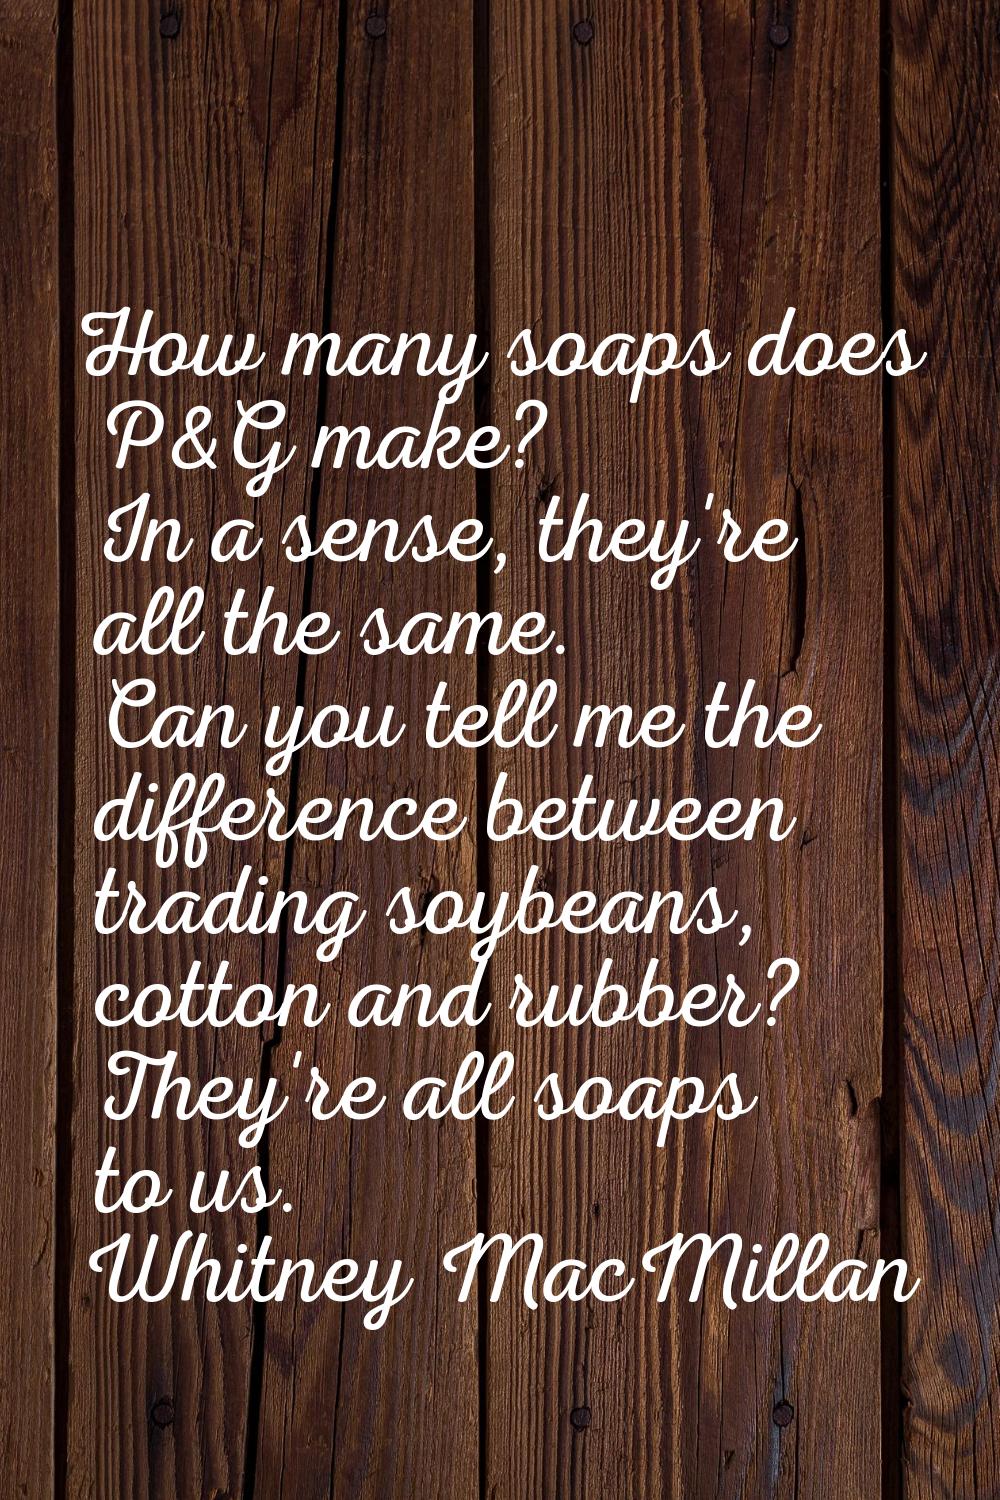 How many soaps does P&G make? In a sense, they're all the same. Can you tell me the difference betw